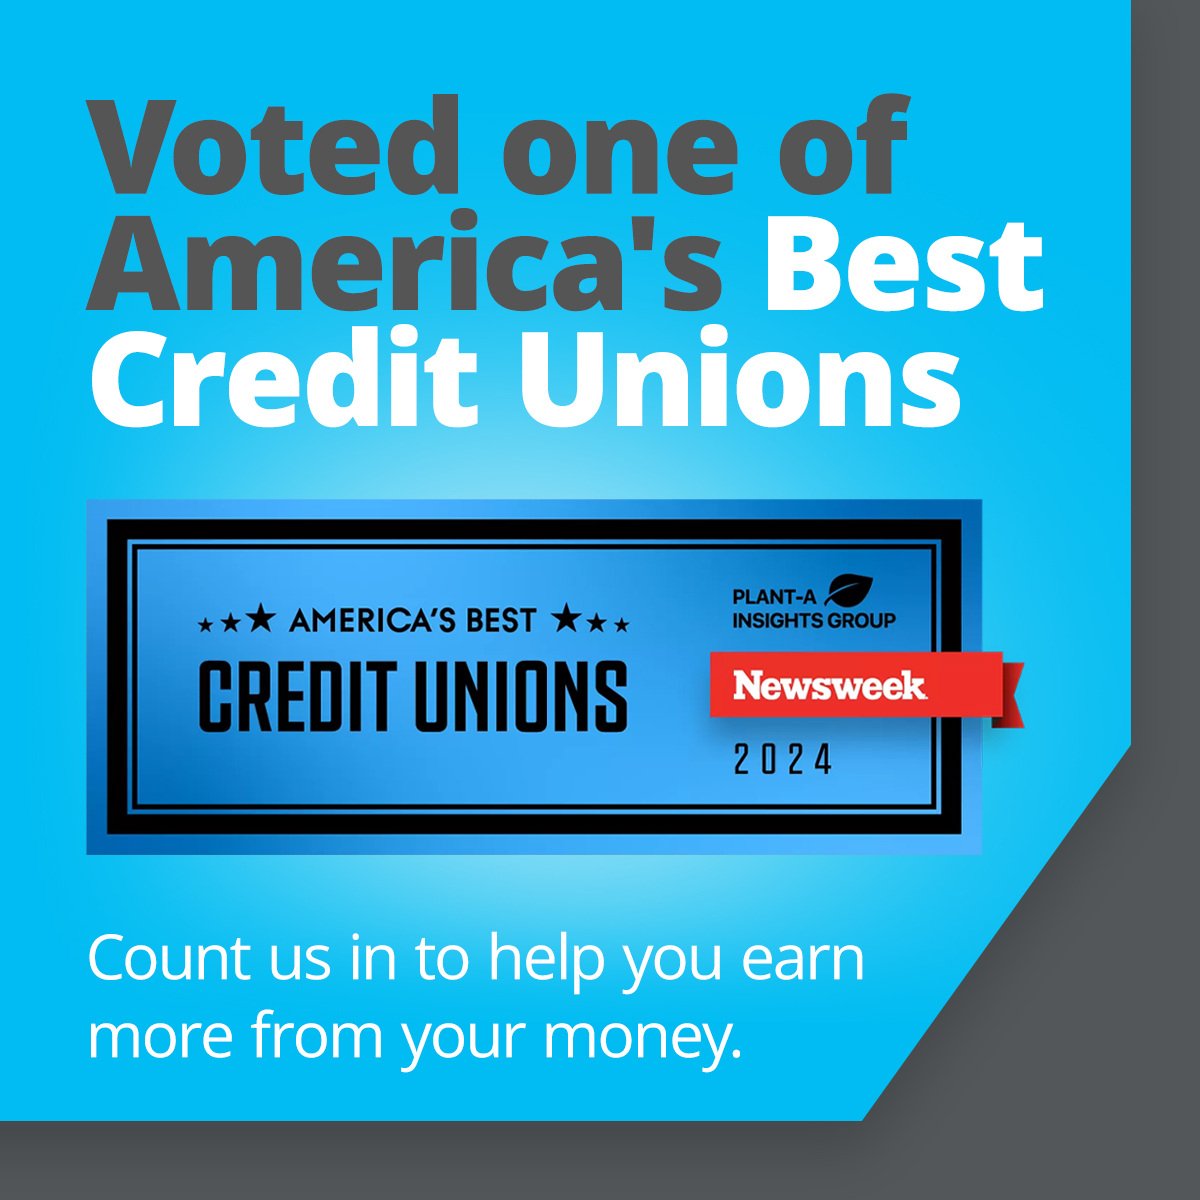 Voted one of America's Best Credit Unions